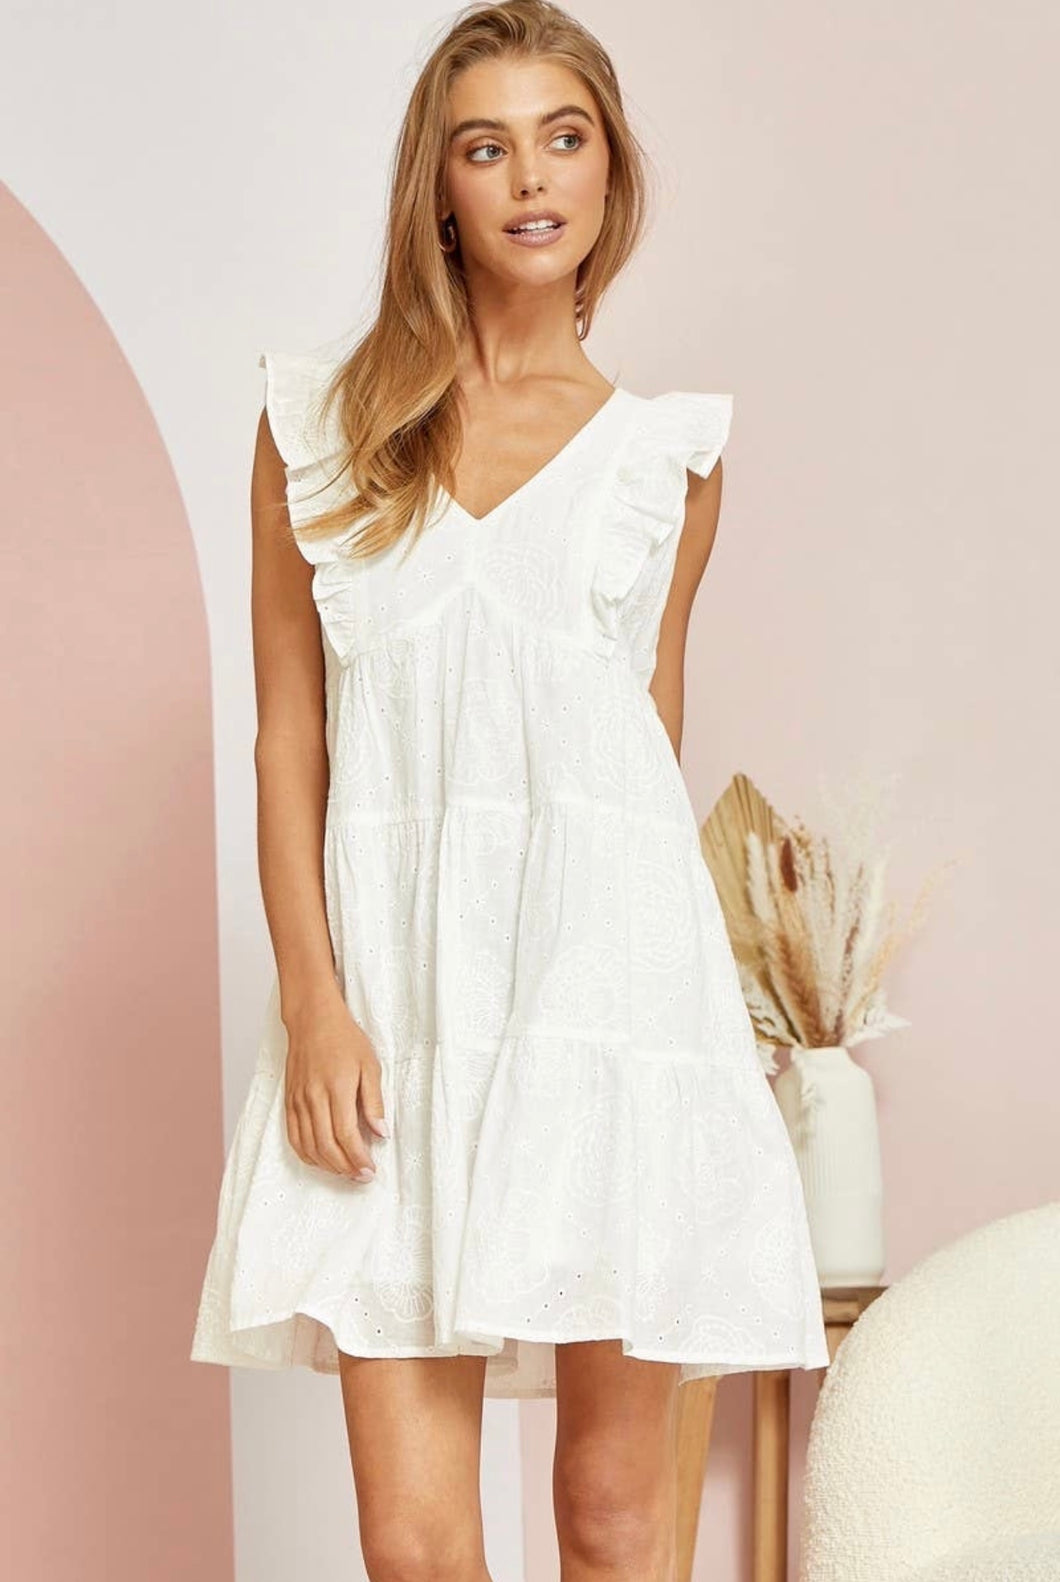 Crisp White Eyelet Dress-Sale - Wildfire and Lace